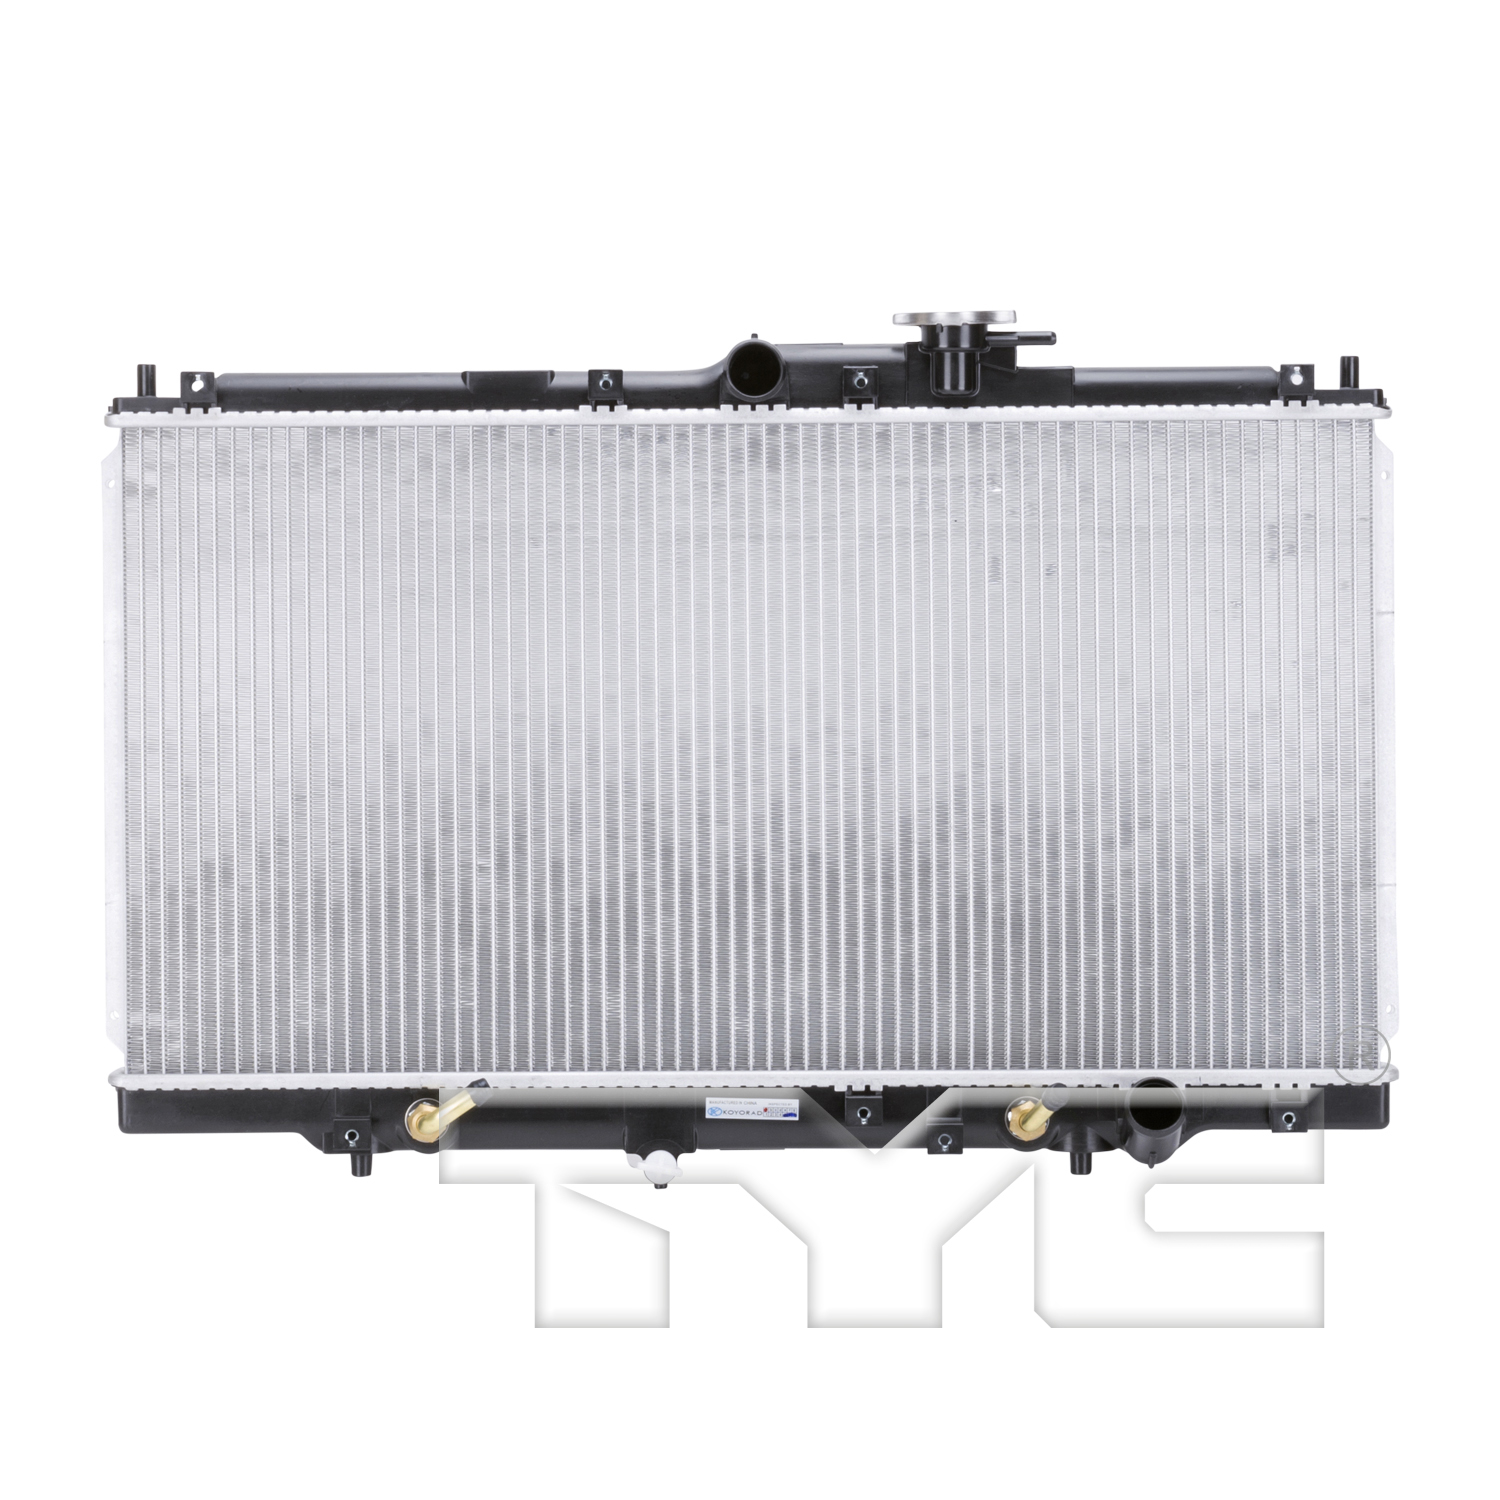 Aftermarket RADIATORS for ACURA - CL, CL,97-99,Radiator assembly